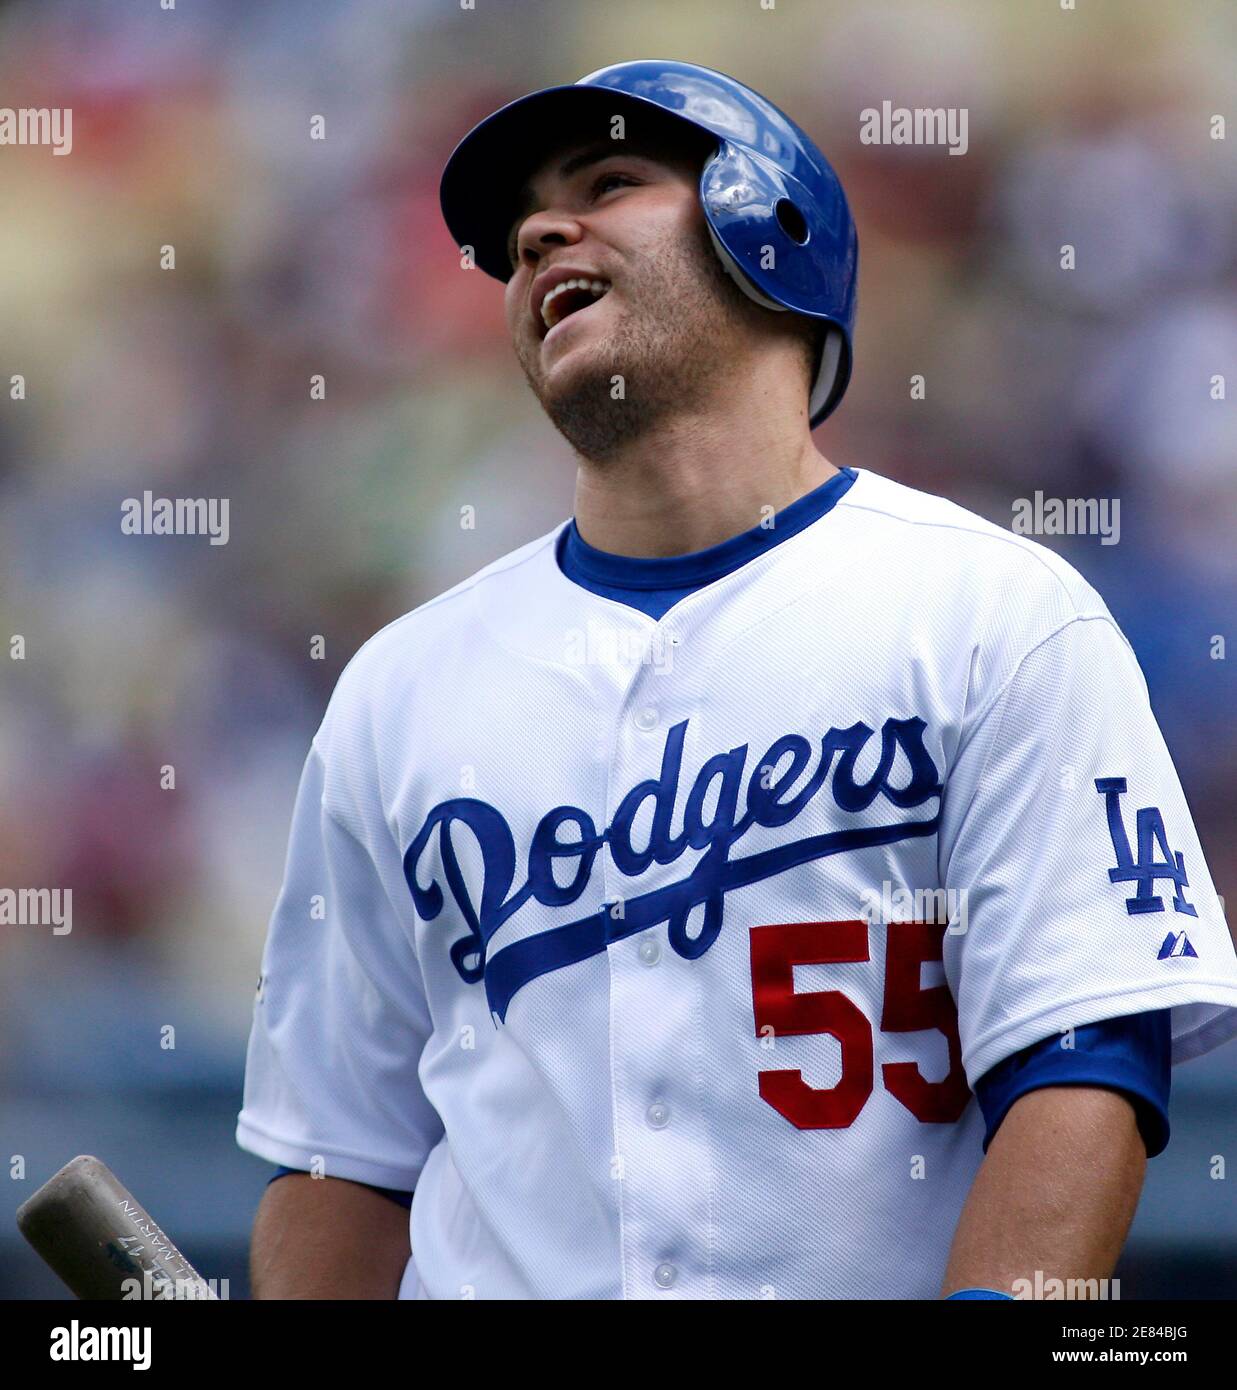 Los Angeles Dodgers' Russell Martin reacts to the umpires call during the first inning of their exhibition MLB baseball game against the Boston Red Sox in Los Angeles March 30, 2008. REUTERS/Gus Ruelas (UNITED STATES) Stock Photo